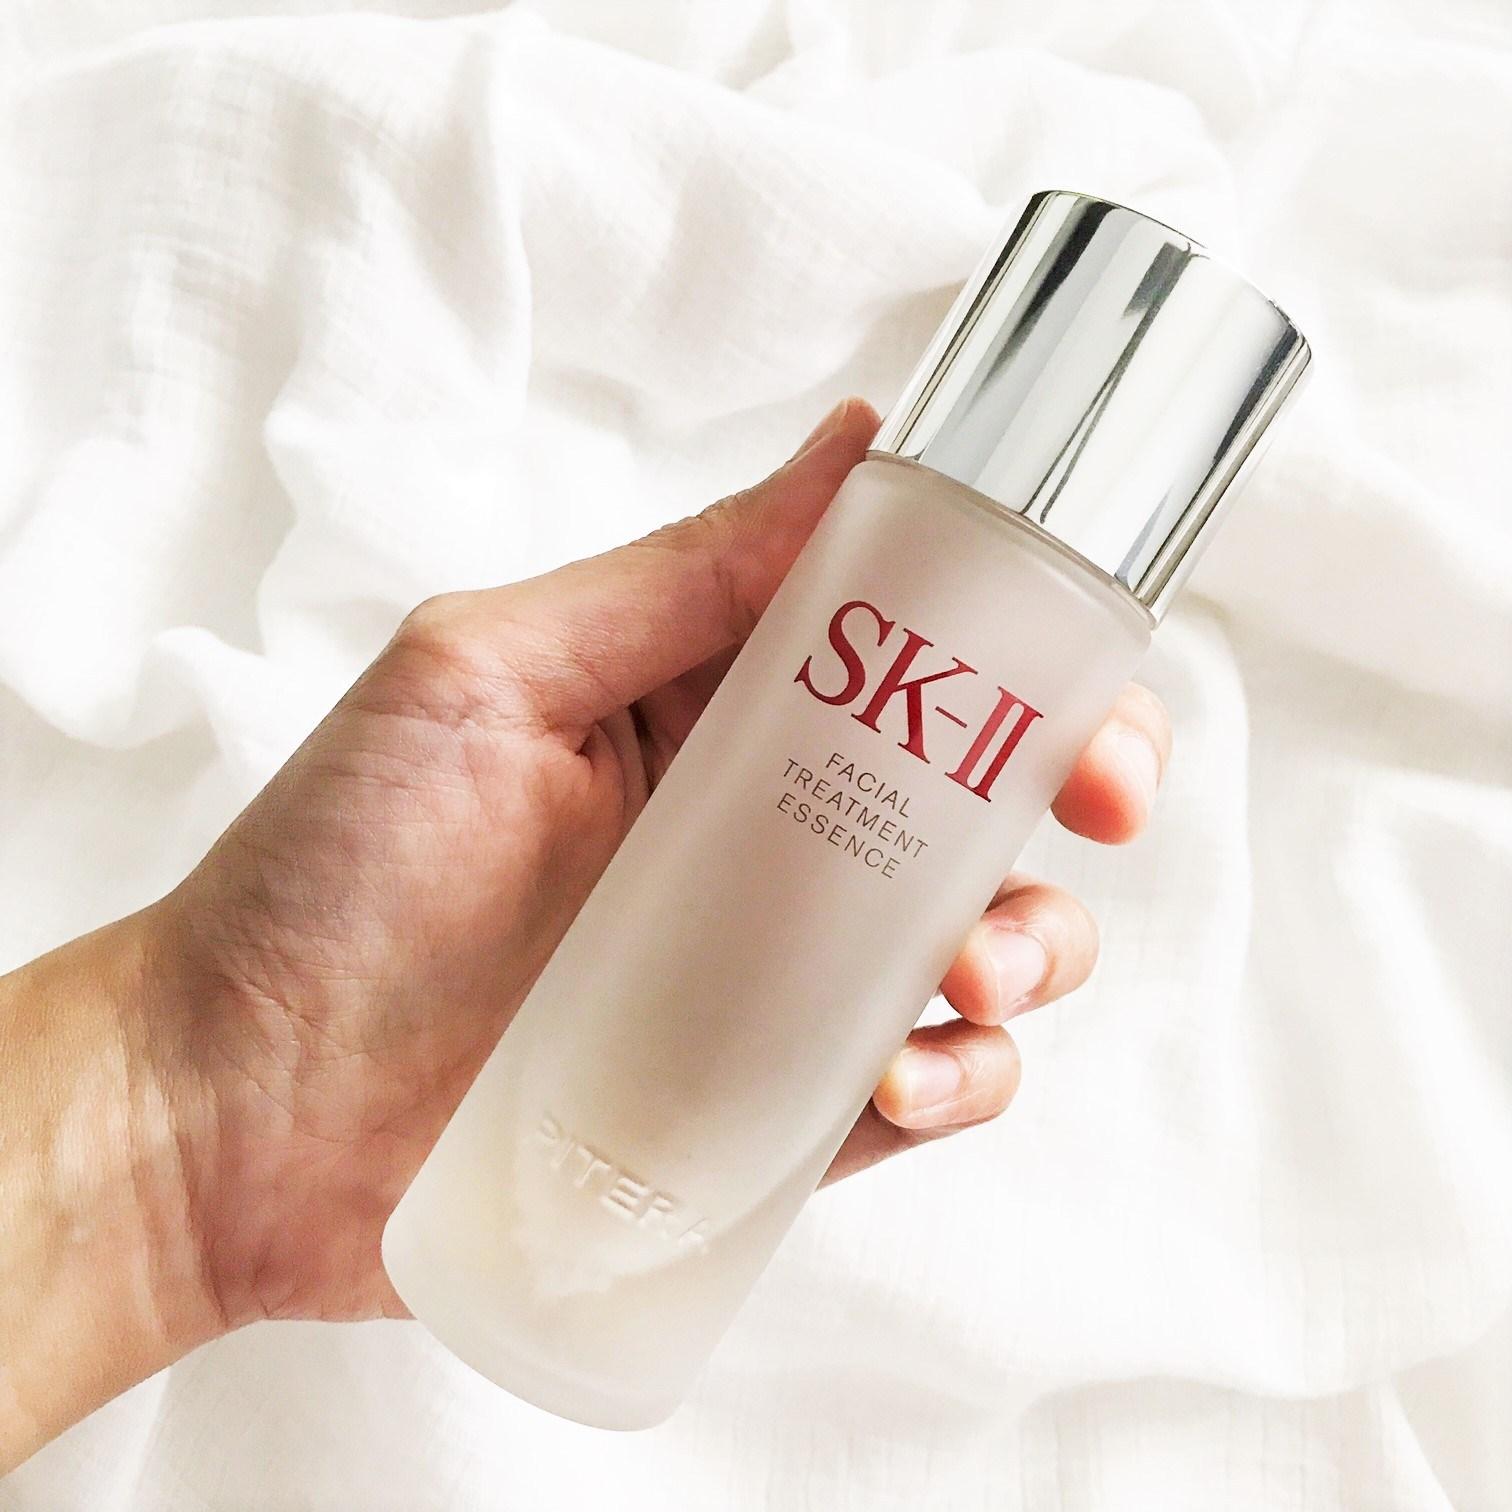 【SK-II PITERA Deluxe Hydrating Set】at Low Price - TofuSecret™